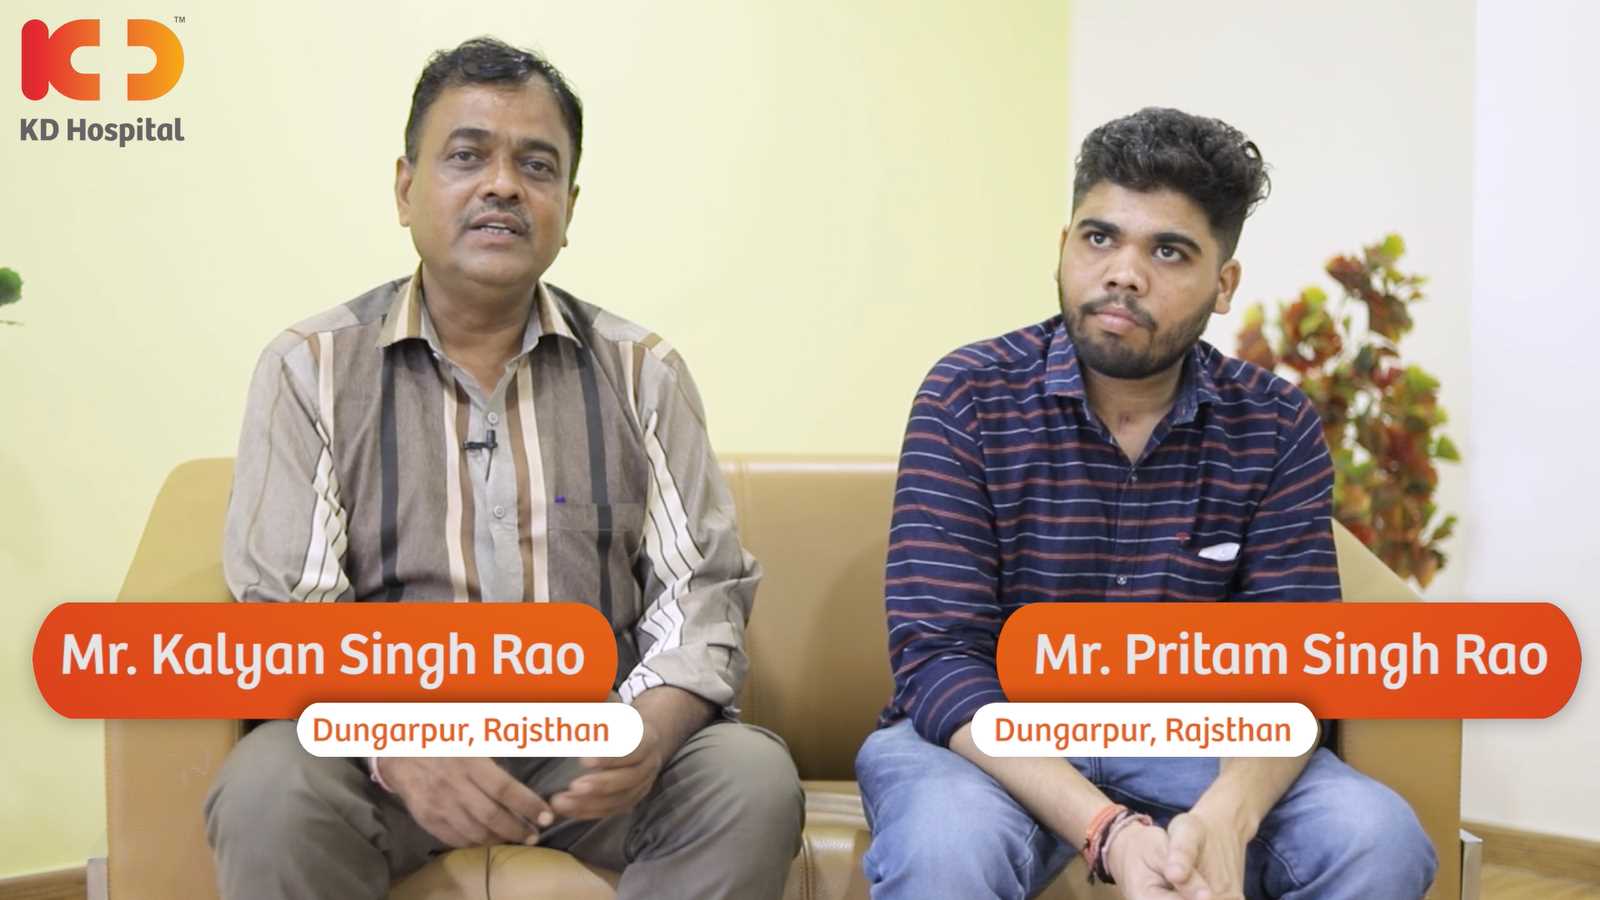 Hear our patient Pritam Singh Rao's story from his uncle about his recovery after tracheostomy and balloon dilatation performed by our ENT Surgeon Dr Hardik Shah. 

#KDHospital #MultiSpecialtyHospital #PatientExperience #PatientCare #PatientSpeaks #Compassion #Doctors #Diagnosis #Therapeutics #goodhealth #patienttestimonial #patient #testimonial #testimony #soical #socialmediamarketing #digitalmarketing #wellness #wellnessthatworks #Ahmedabad #Gujarat #India